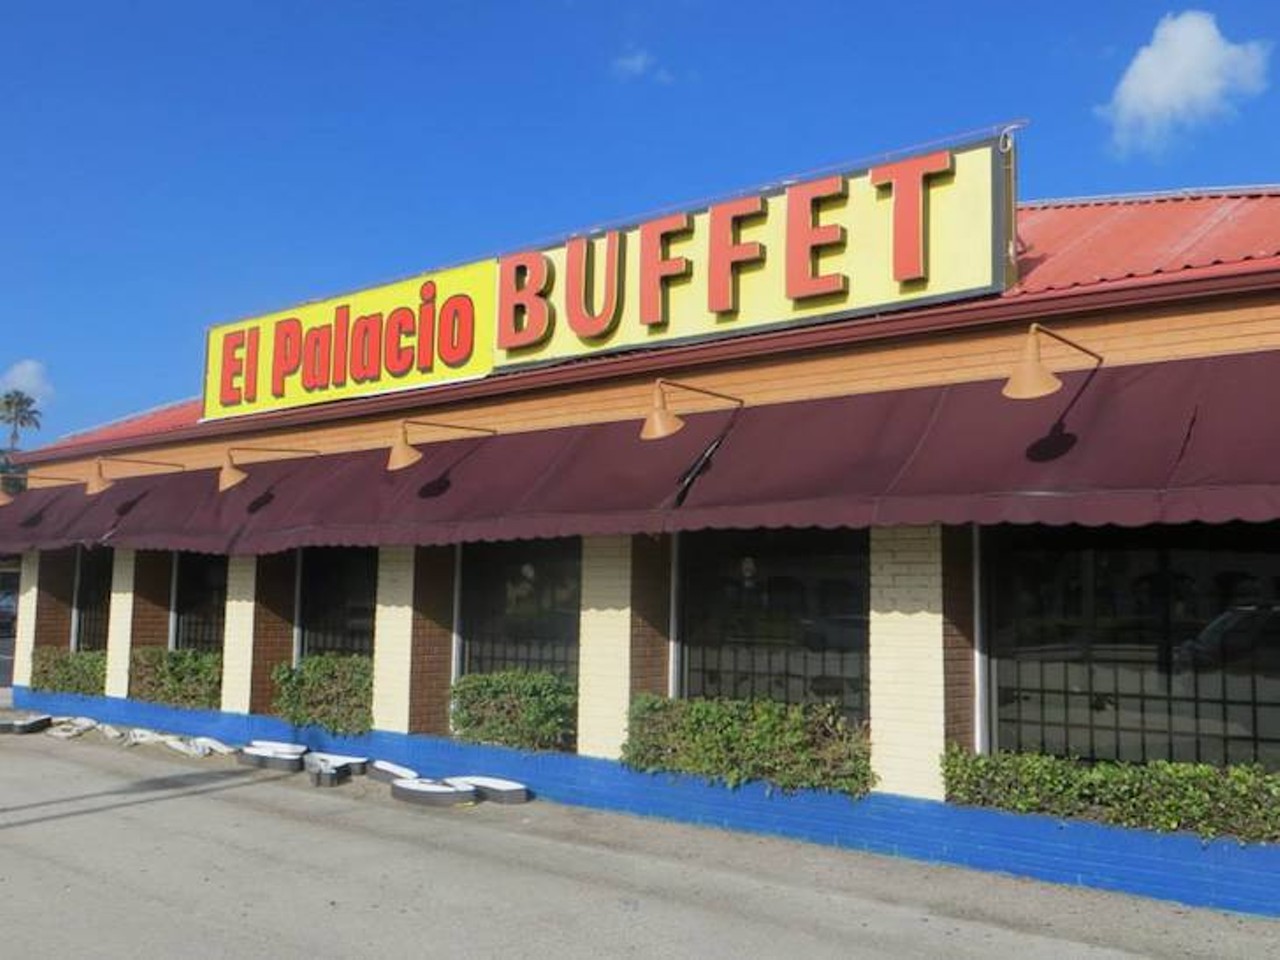 El Palacio Buffet  
?7403 S. Orange Blossom Trail, 407-856-6758; also 843 Lee Road, 407-622-2423
This popular buffet combines Dominican and Puerto Rican delicacies with Chinese cuisine and a taco bar. The prices varies from $8.99 during lunch to $11.99 on the weekends, and it gets packed. 
Photo via El Palacio Buffet/Facebook